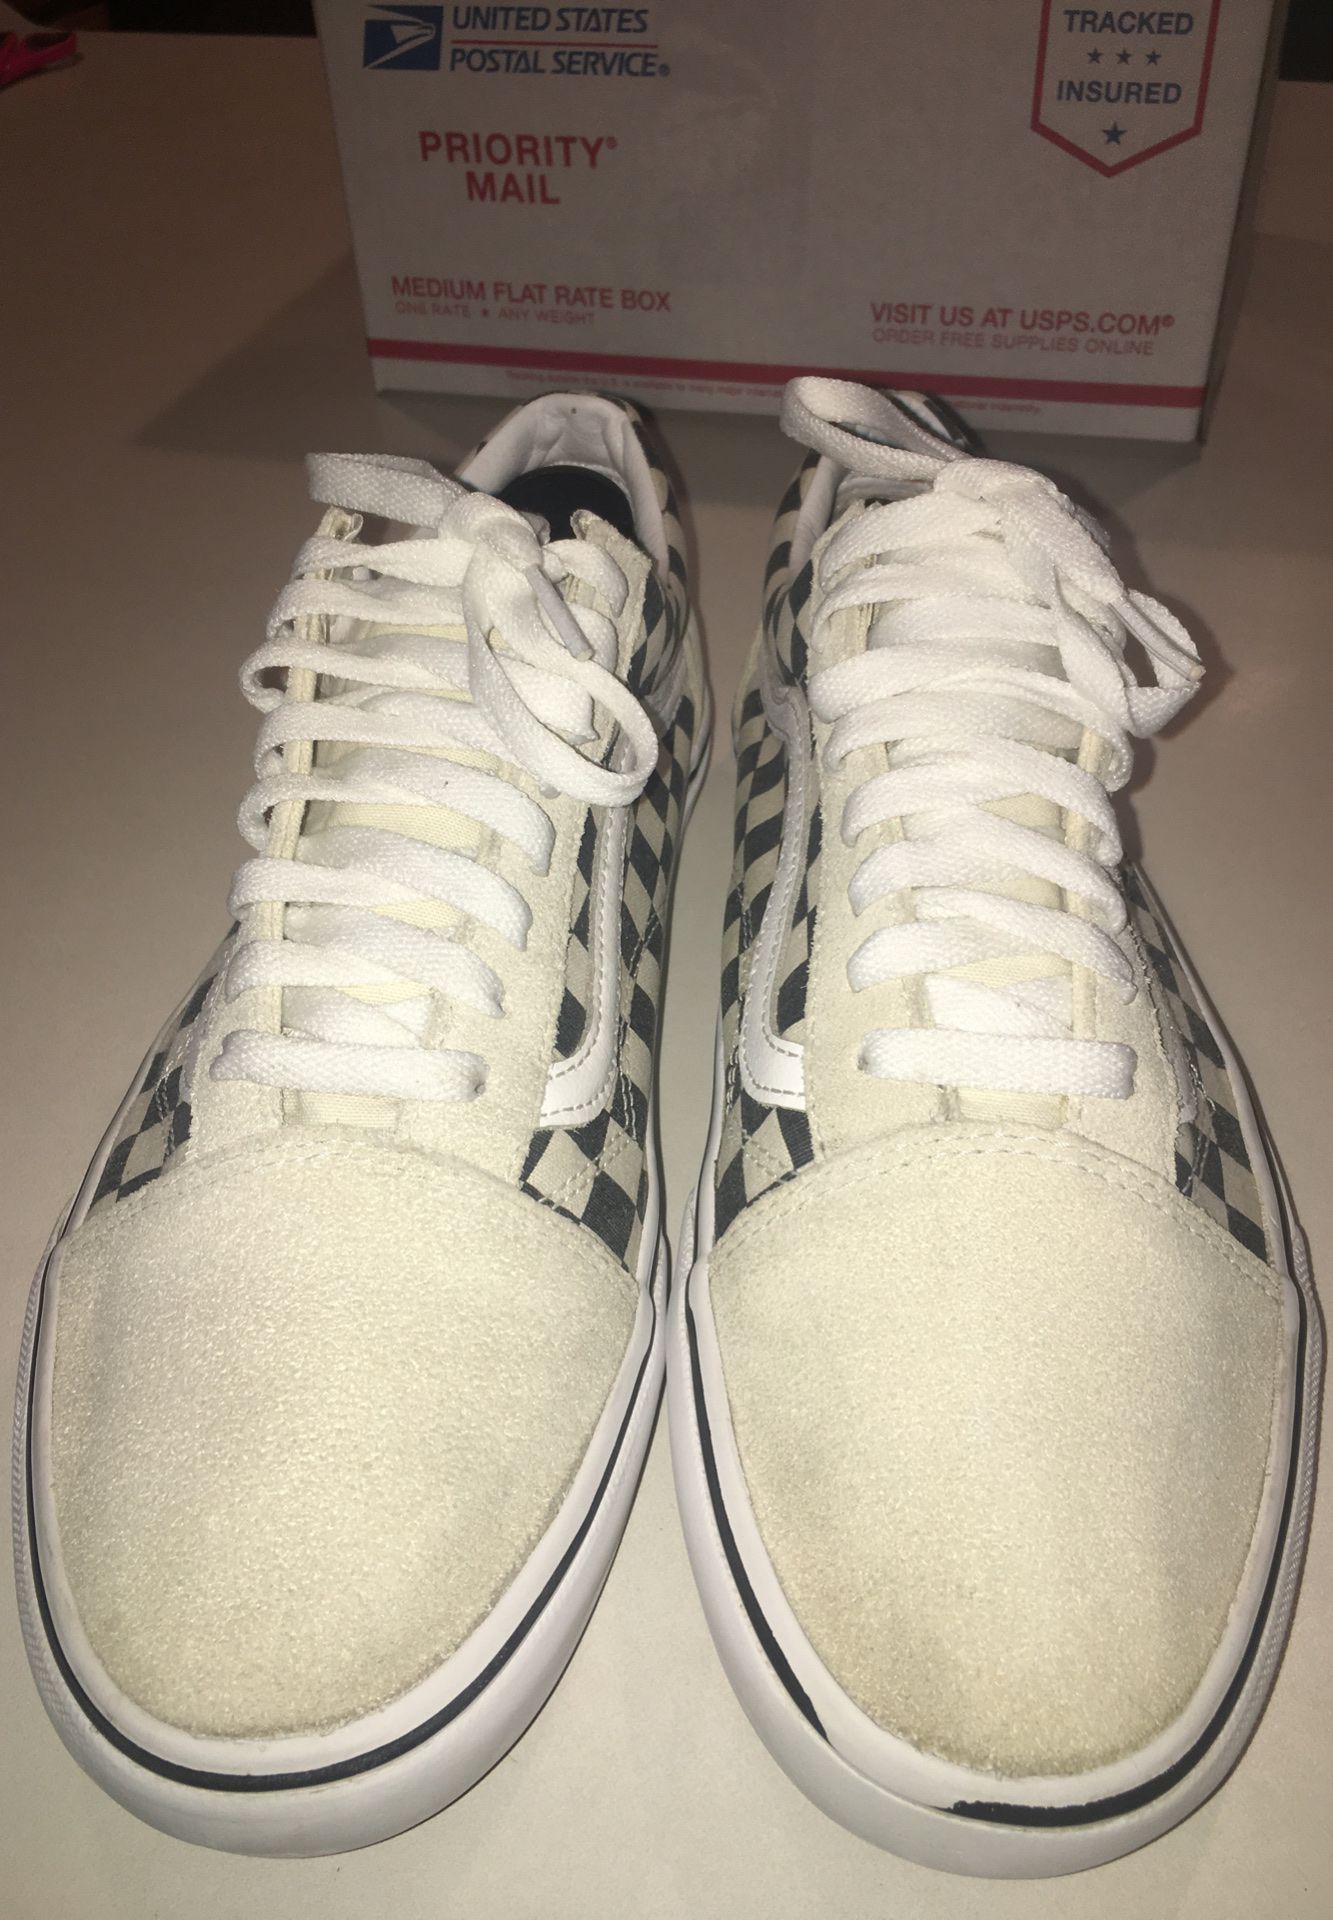 Men’s 10 Vans old school check board tan and white